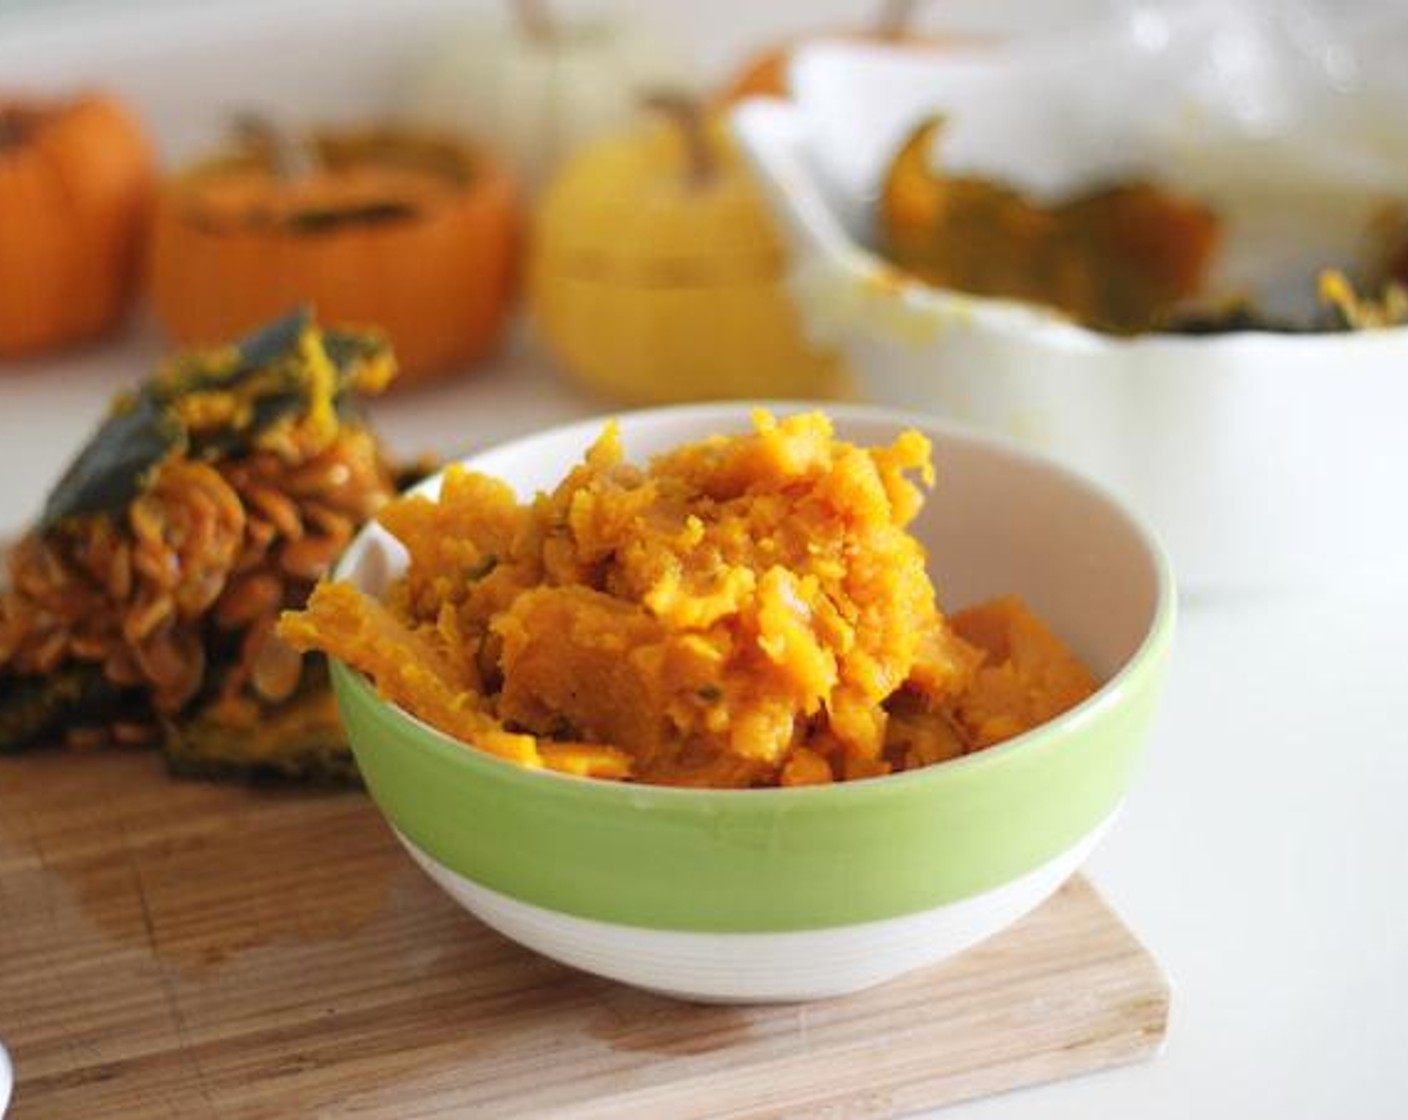 step 2 The next day, boil the Pumpkin (1 cup). Make a puree from the boiled pumpkin in a bowl.